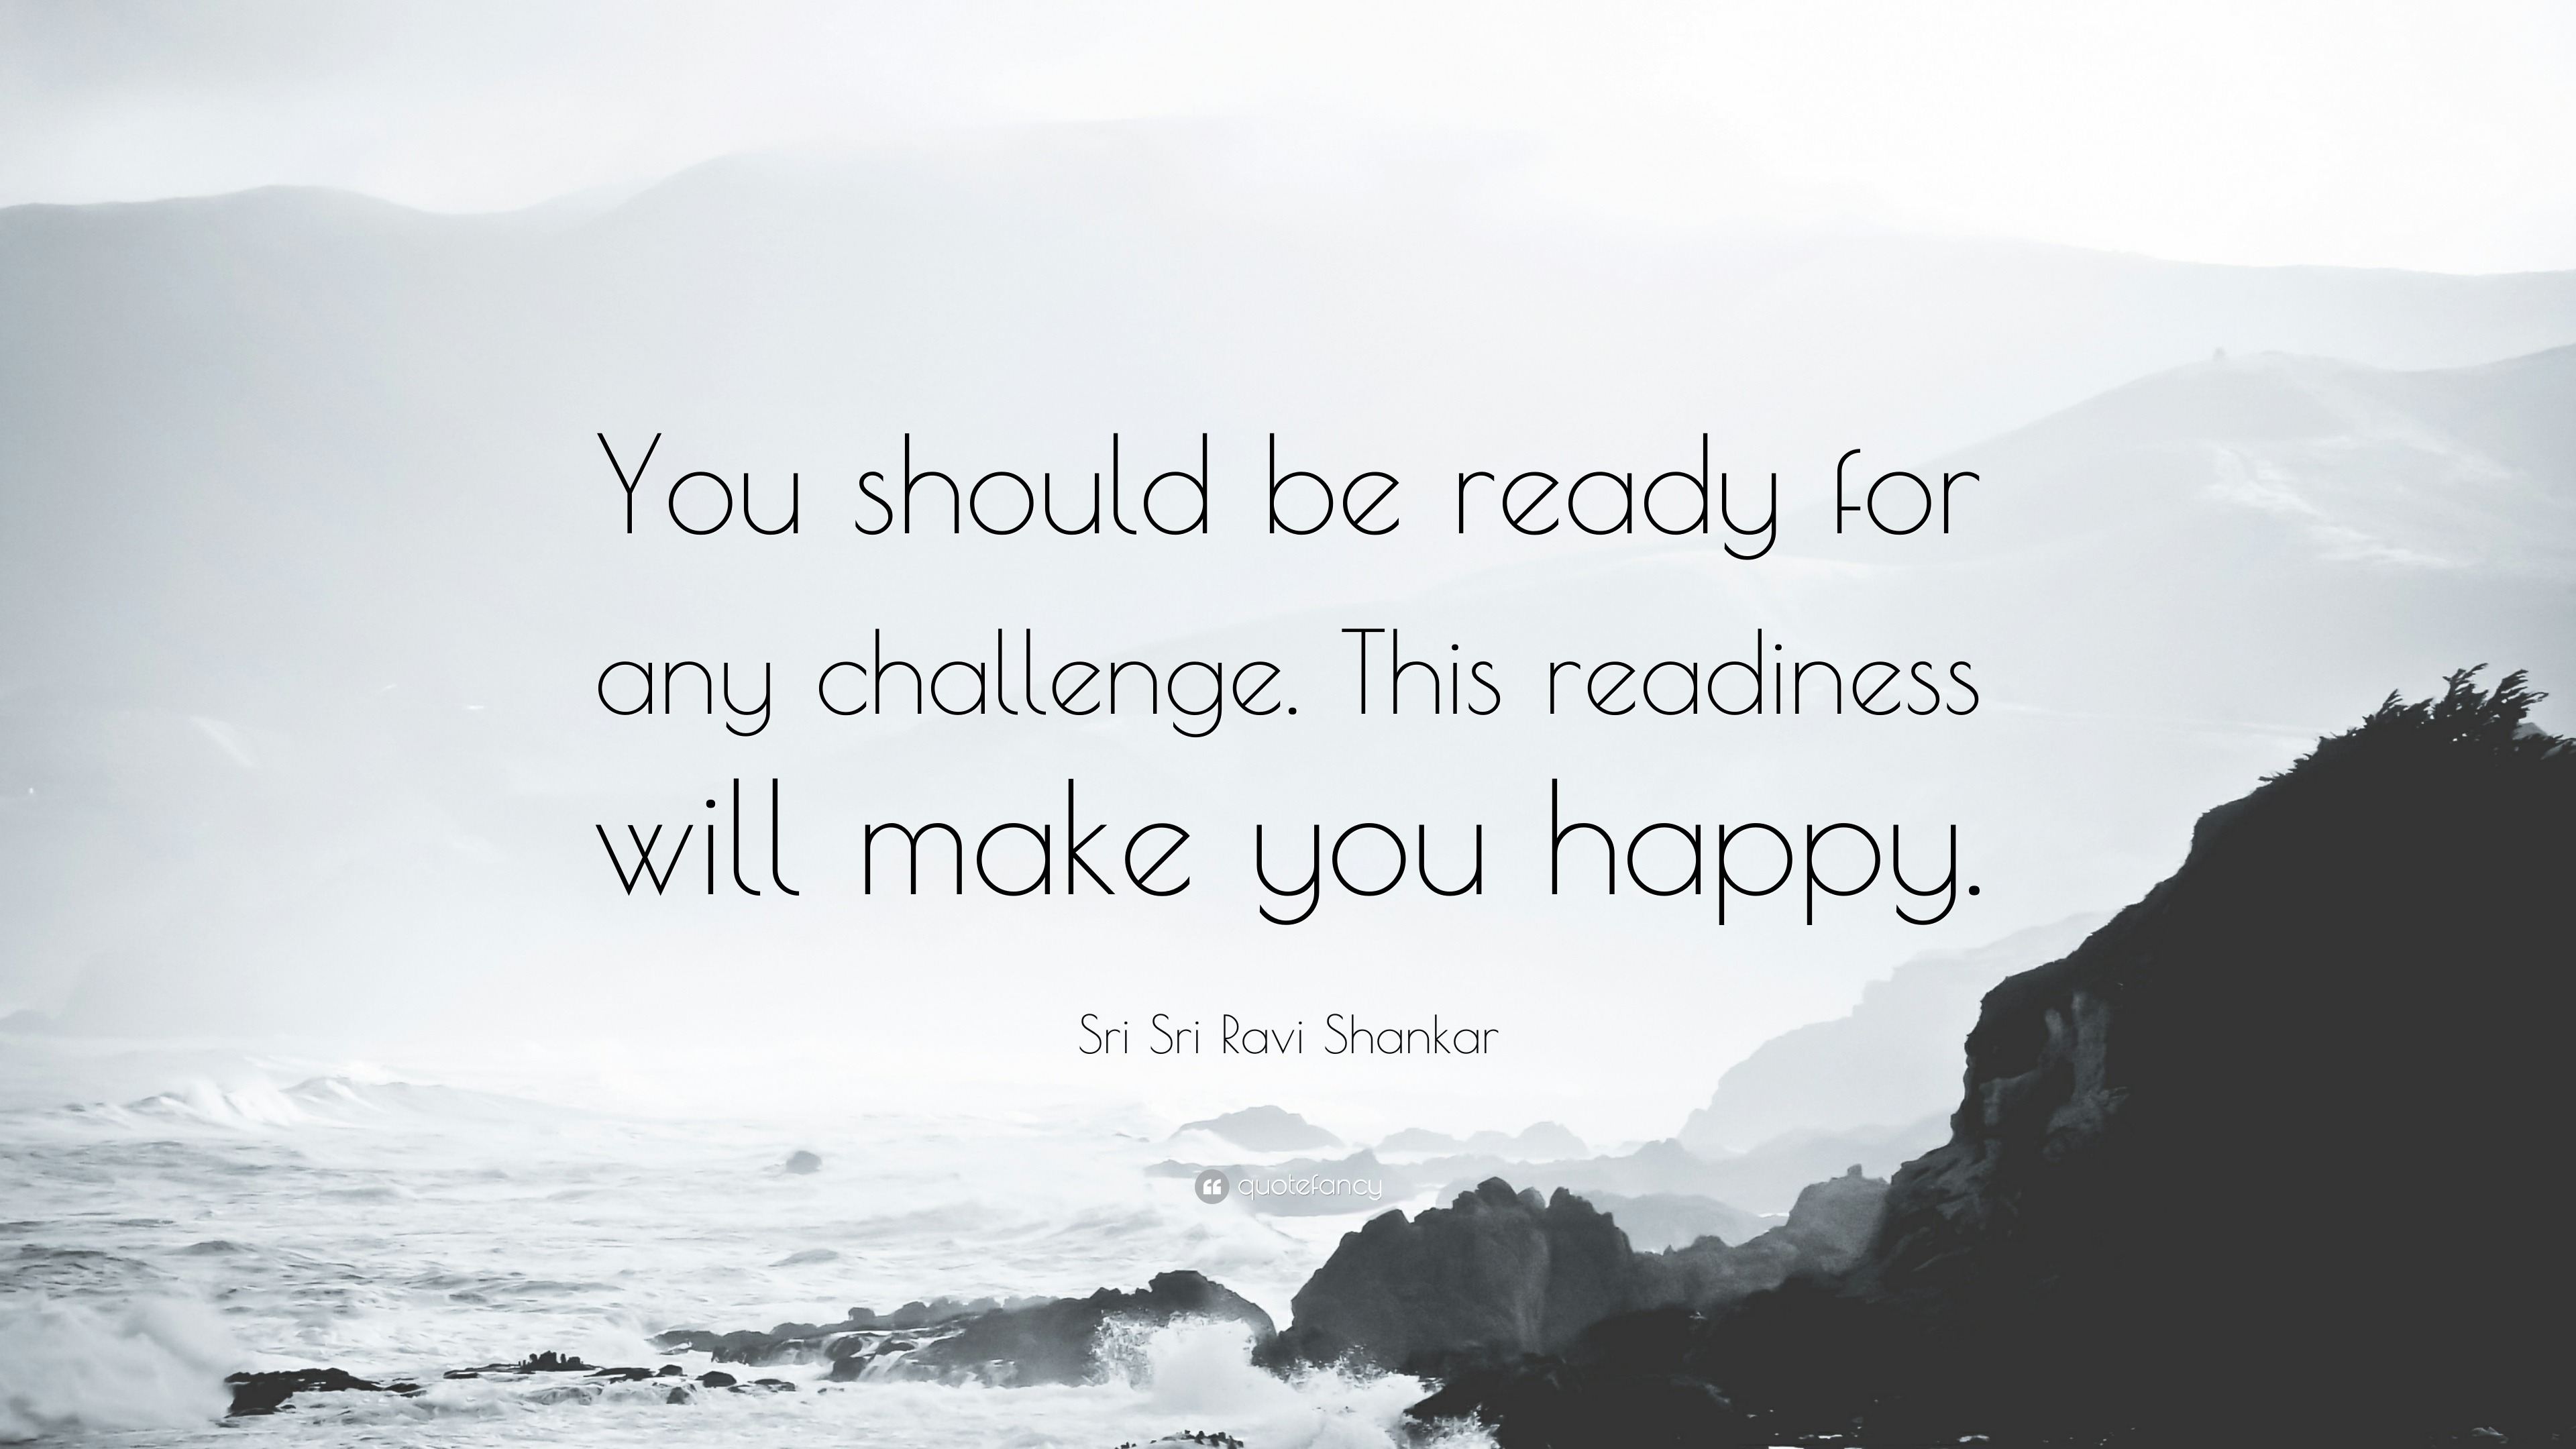 Sri Sri Ravi Shankar Quote: “You should be ready for any challenge ...